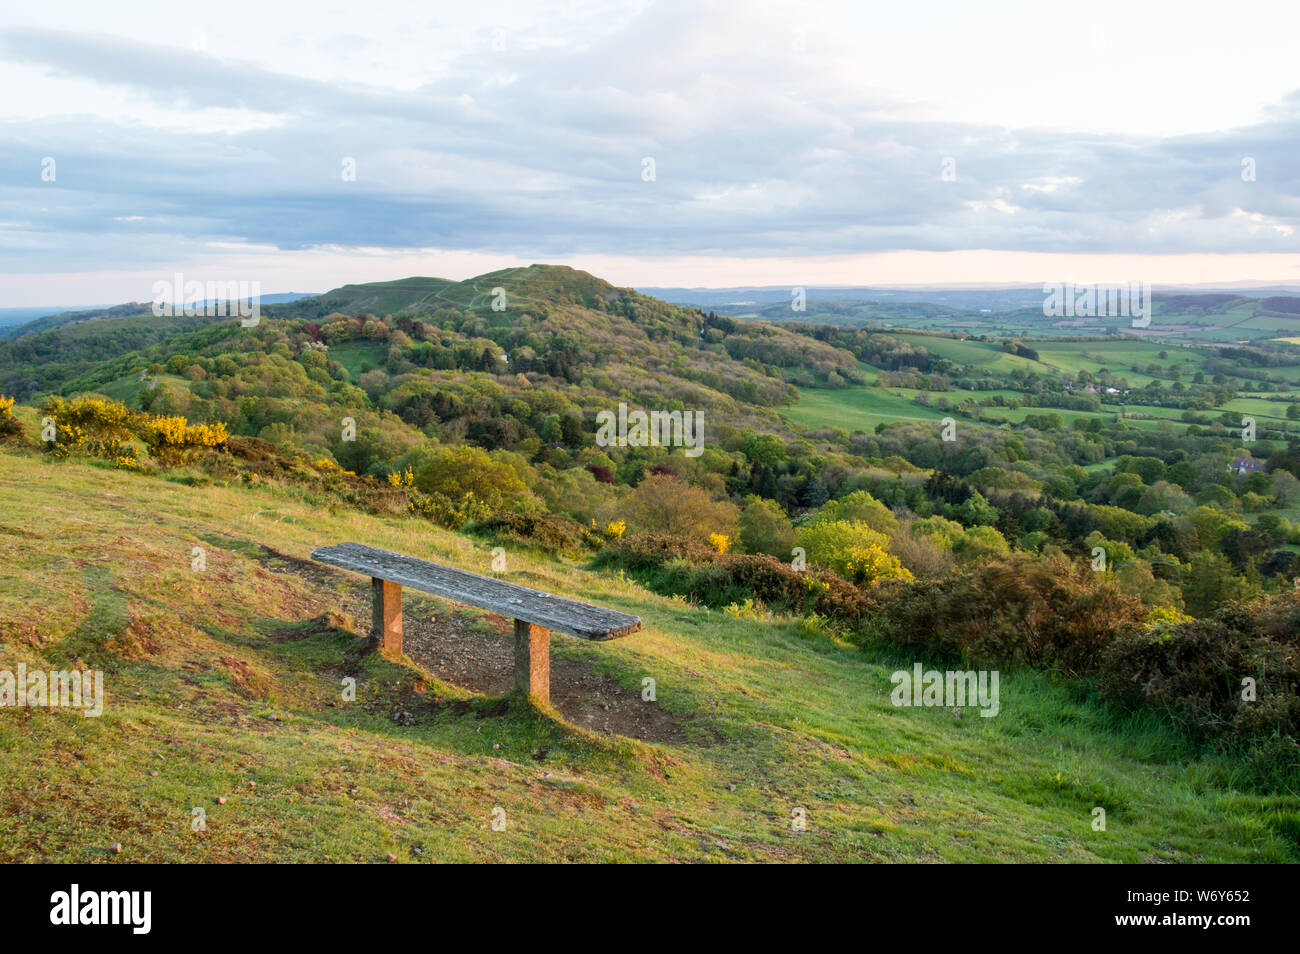 Looking across the hills of the English landscape on a sunny afternoon. The Iron Age hillfort of British Camp, Malvern Hills, UK. Stock Photo